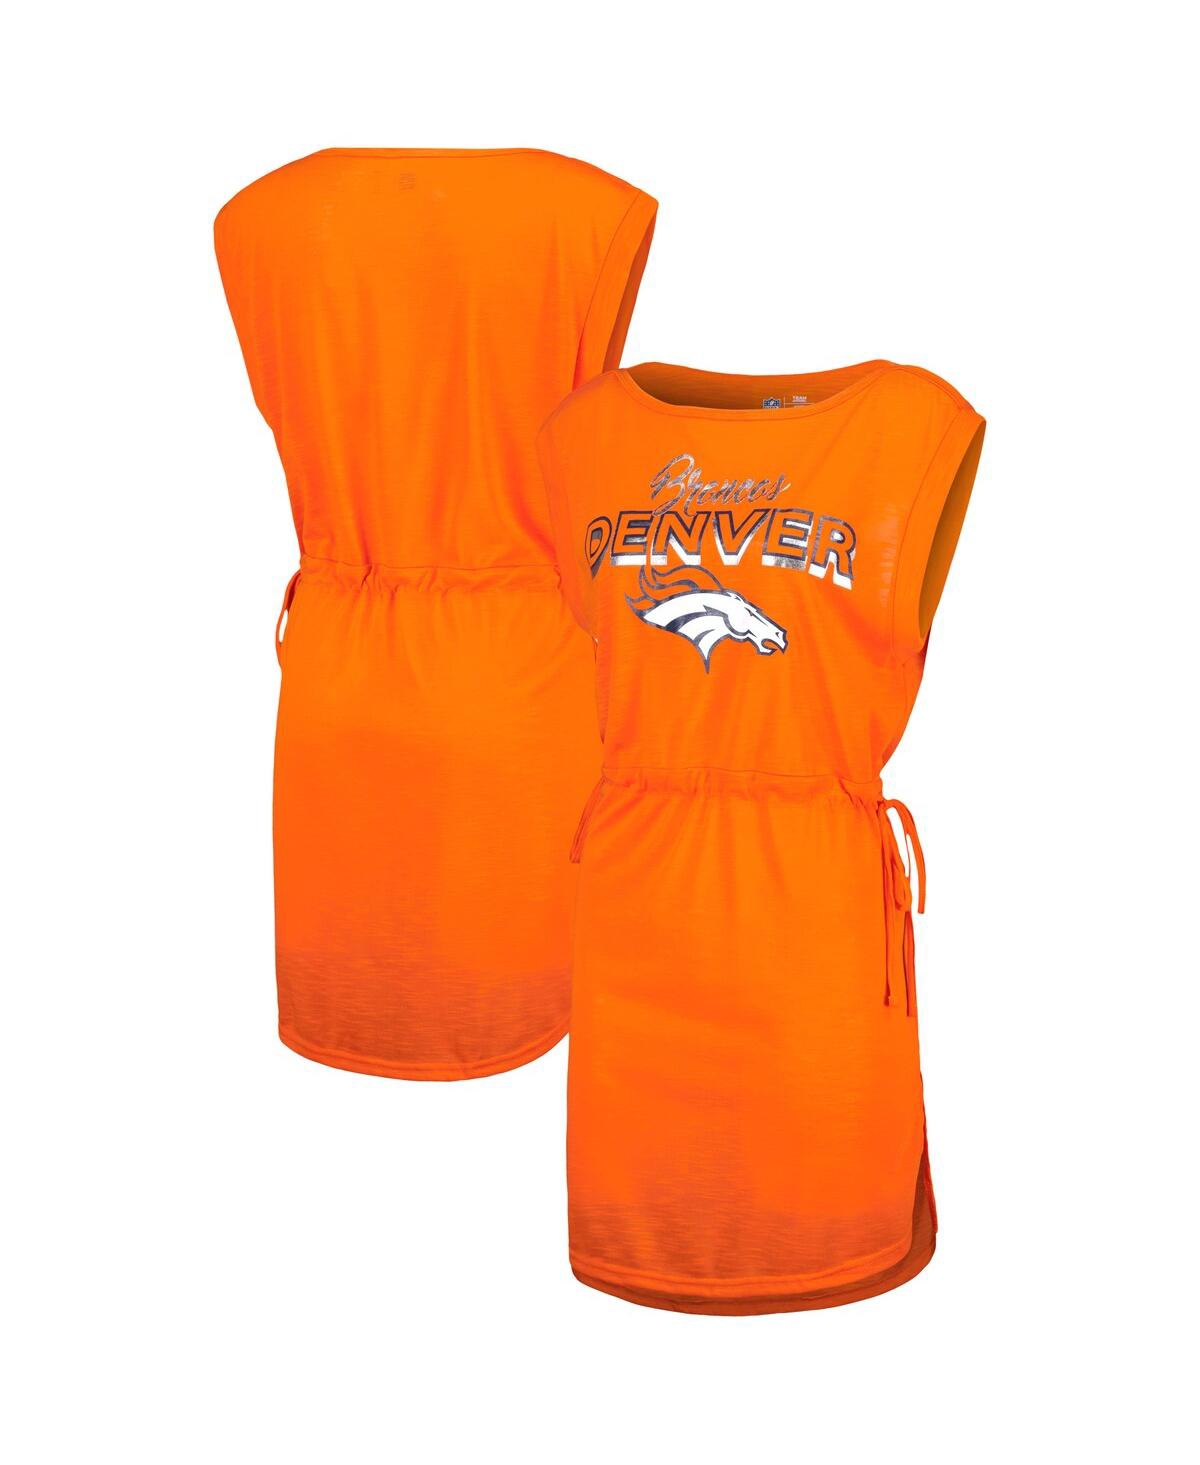 G-III 4HER BY CARL BANKS WOMEN'S G-III 4HER BY CARL BANKS ORANGE DENVER BRONCOS G.O.A.T. SWIMSUIT COVER-UP